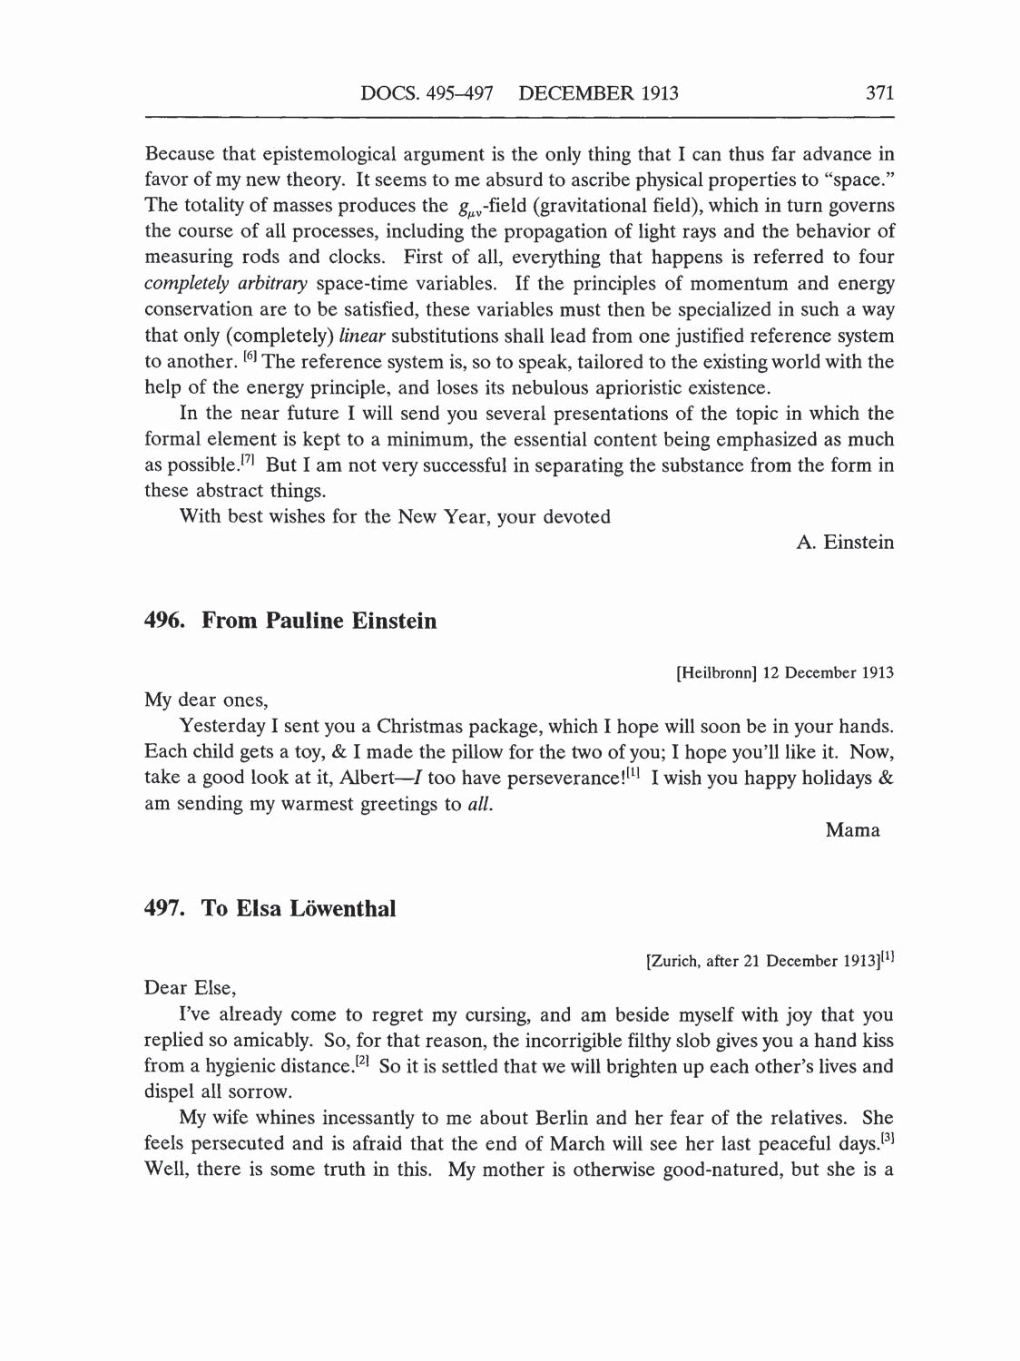 Volume 5: The Swiss Years: Correspondence, 1902-1914 (English translation supplement) page 371